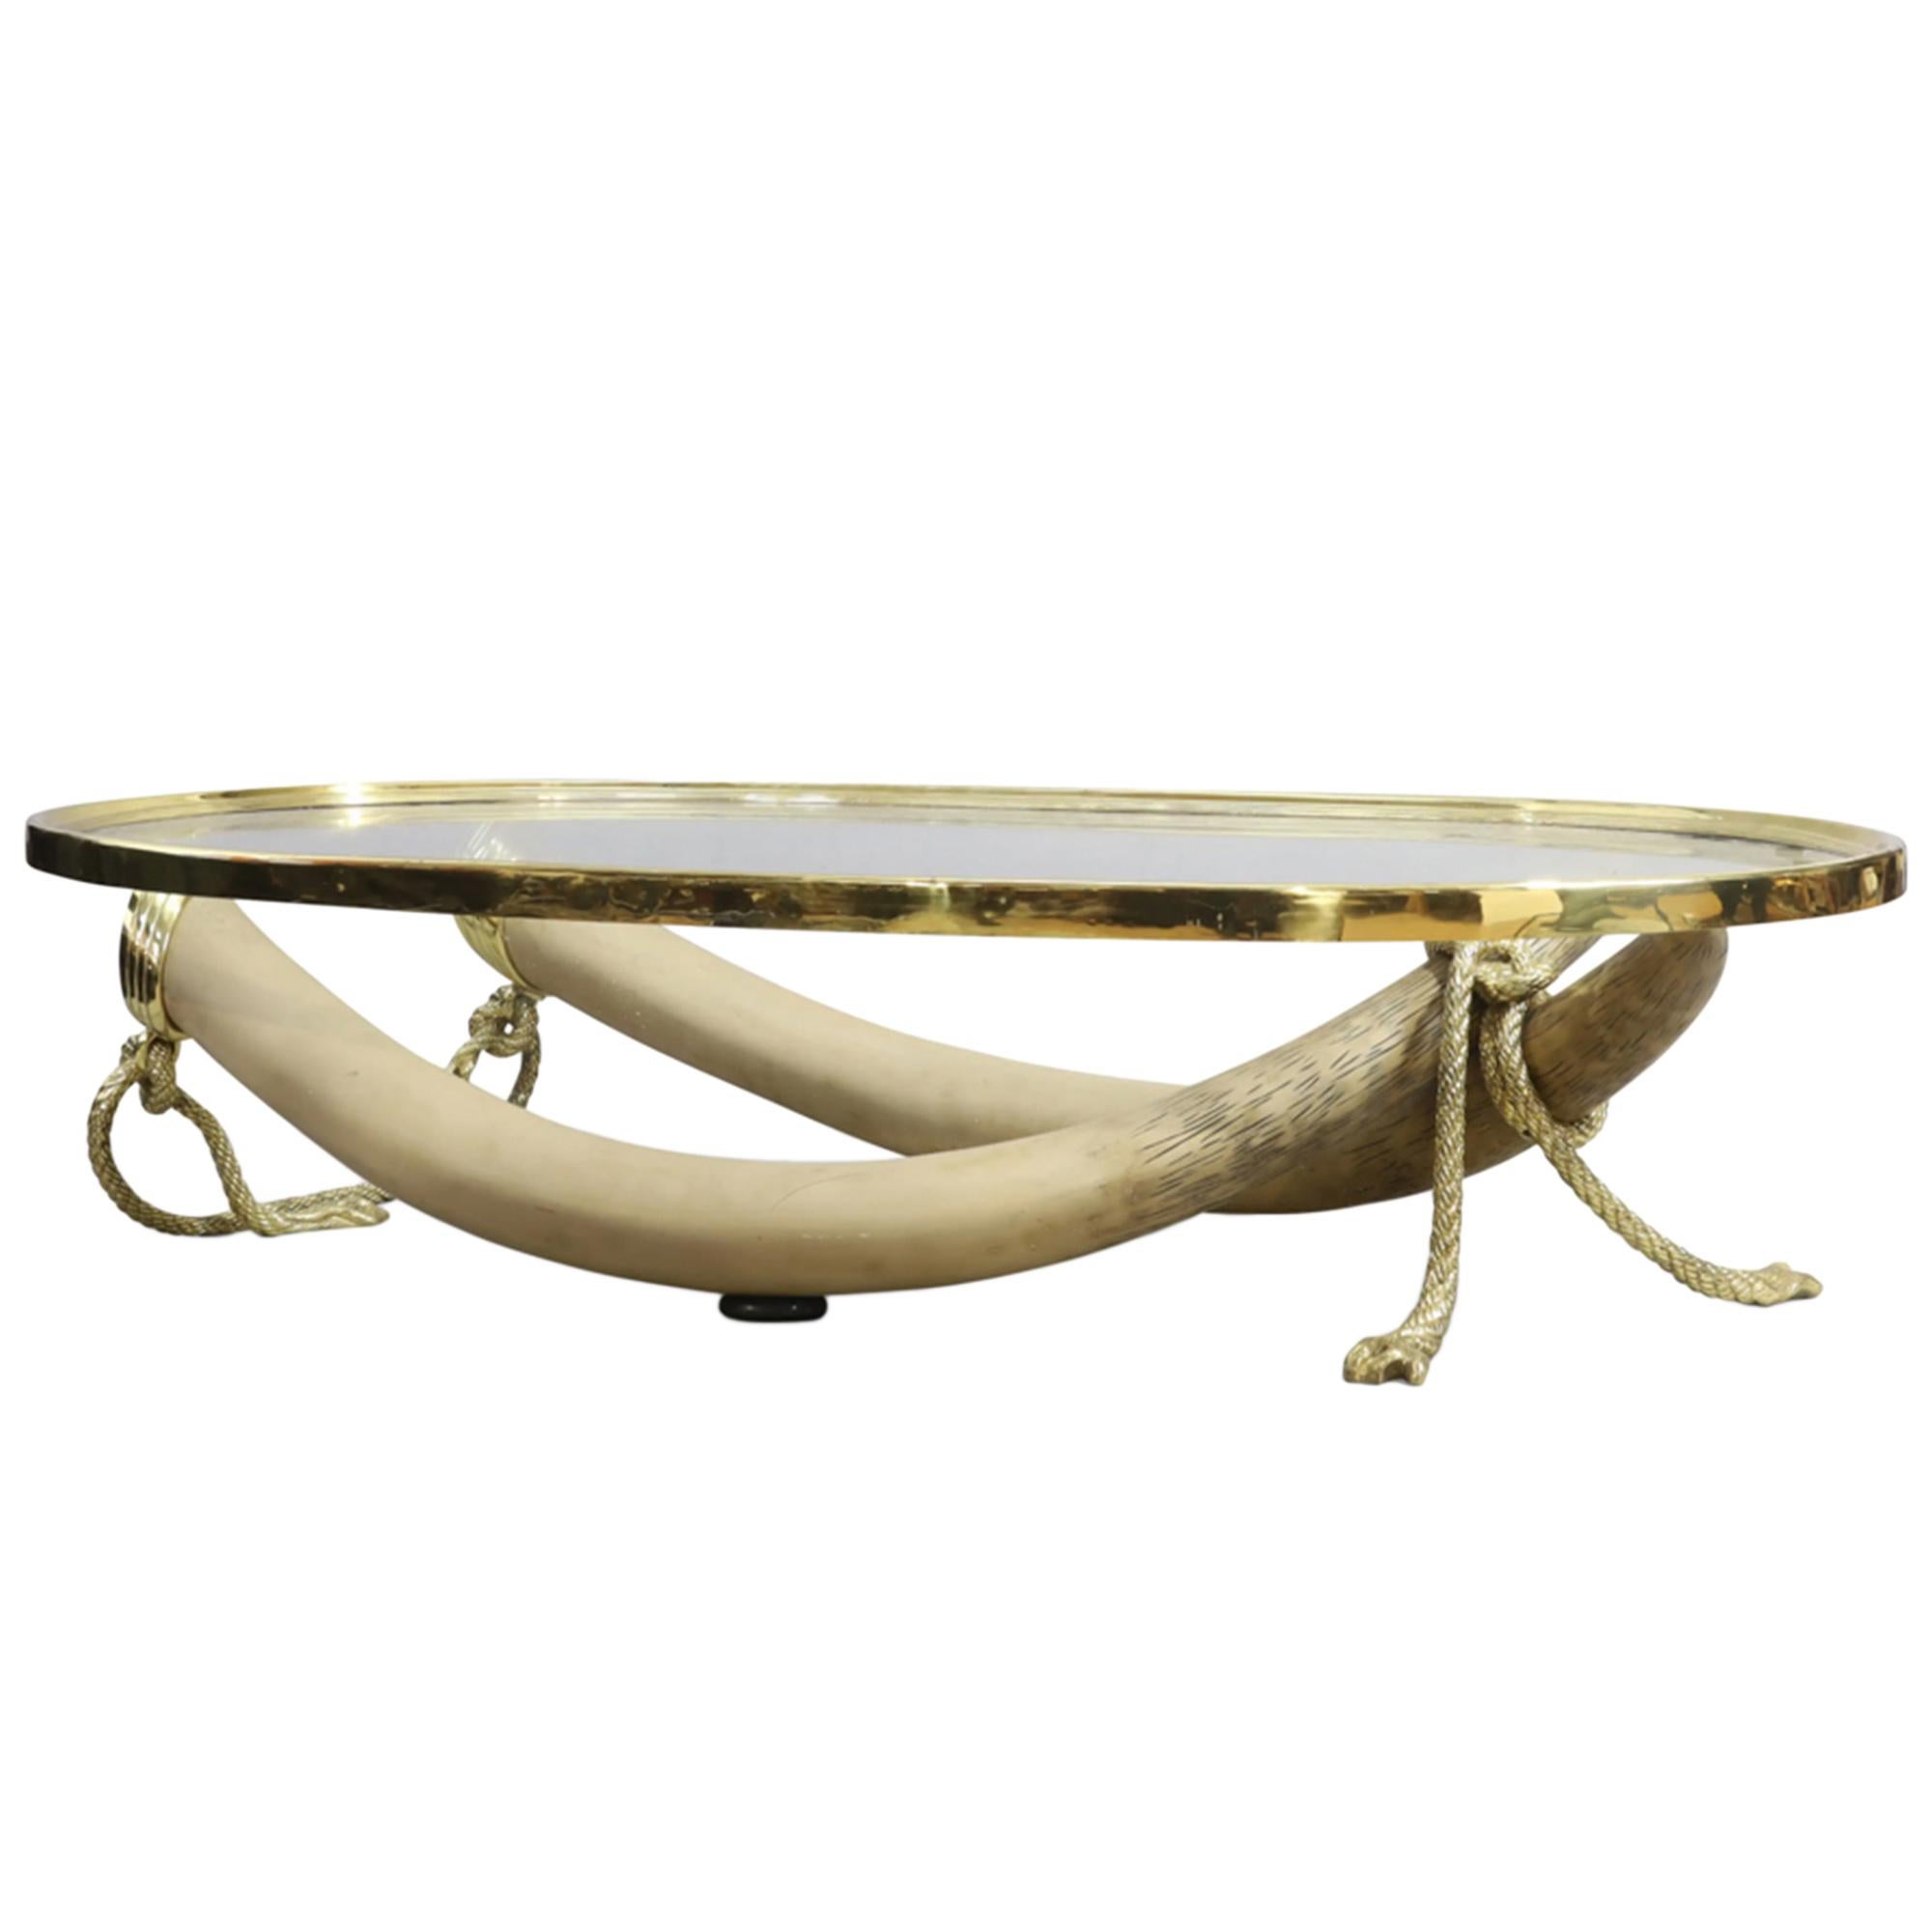 A grand scale coffee table made by the luxury Spanish furniture maker Valenti. 

The rectangular glass top sits above two large faux tusks made from resin and gilt bronze rope twisted supports. The table top is framed with a brass rim. This is one